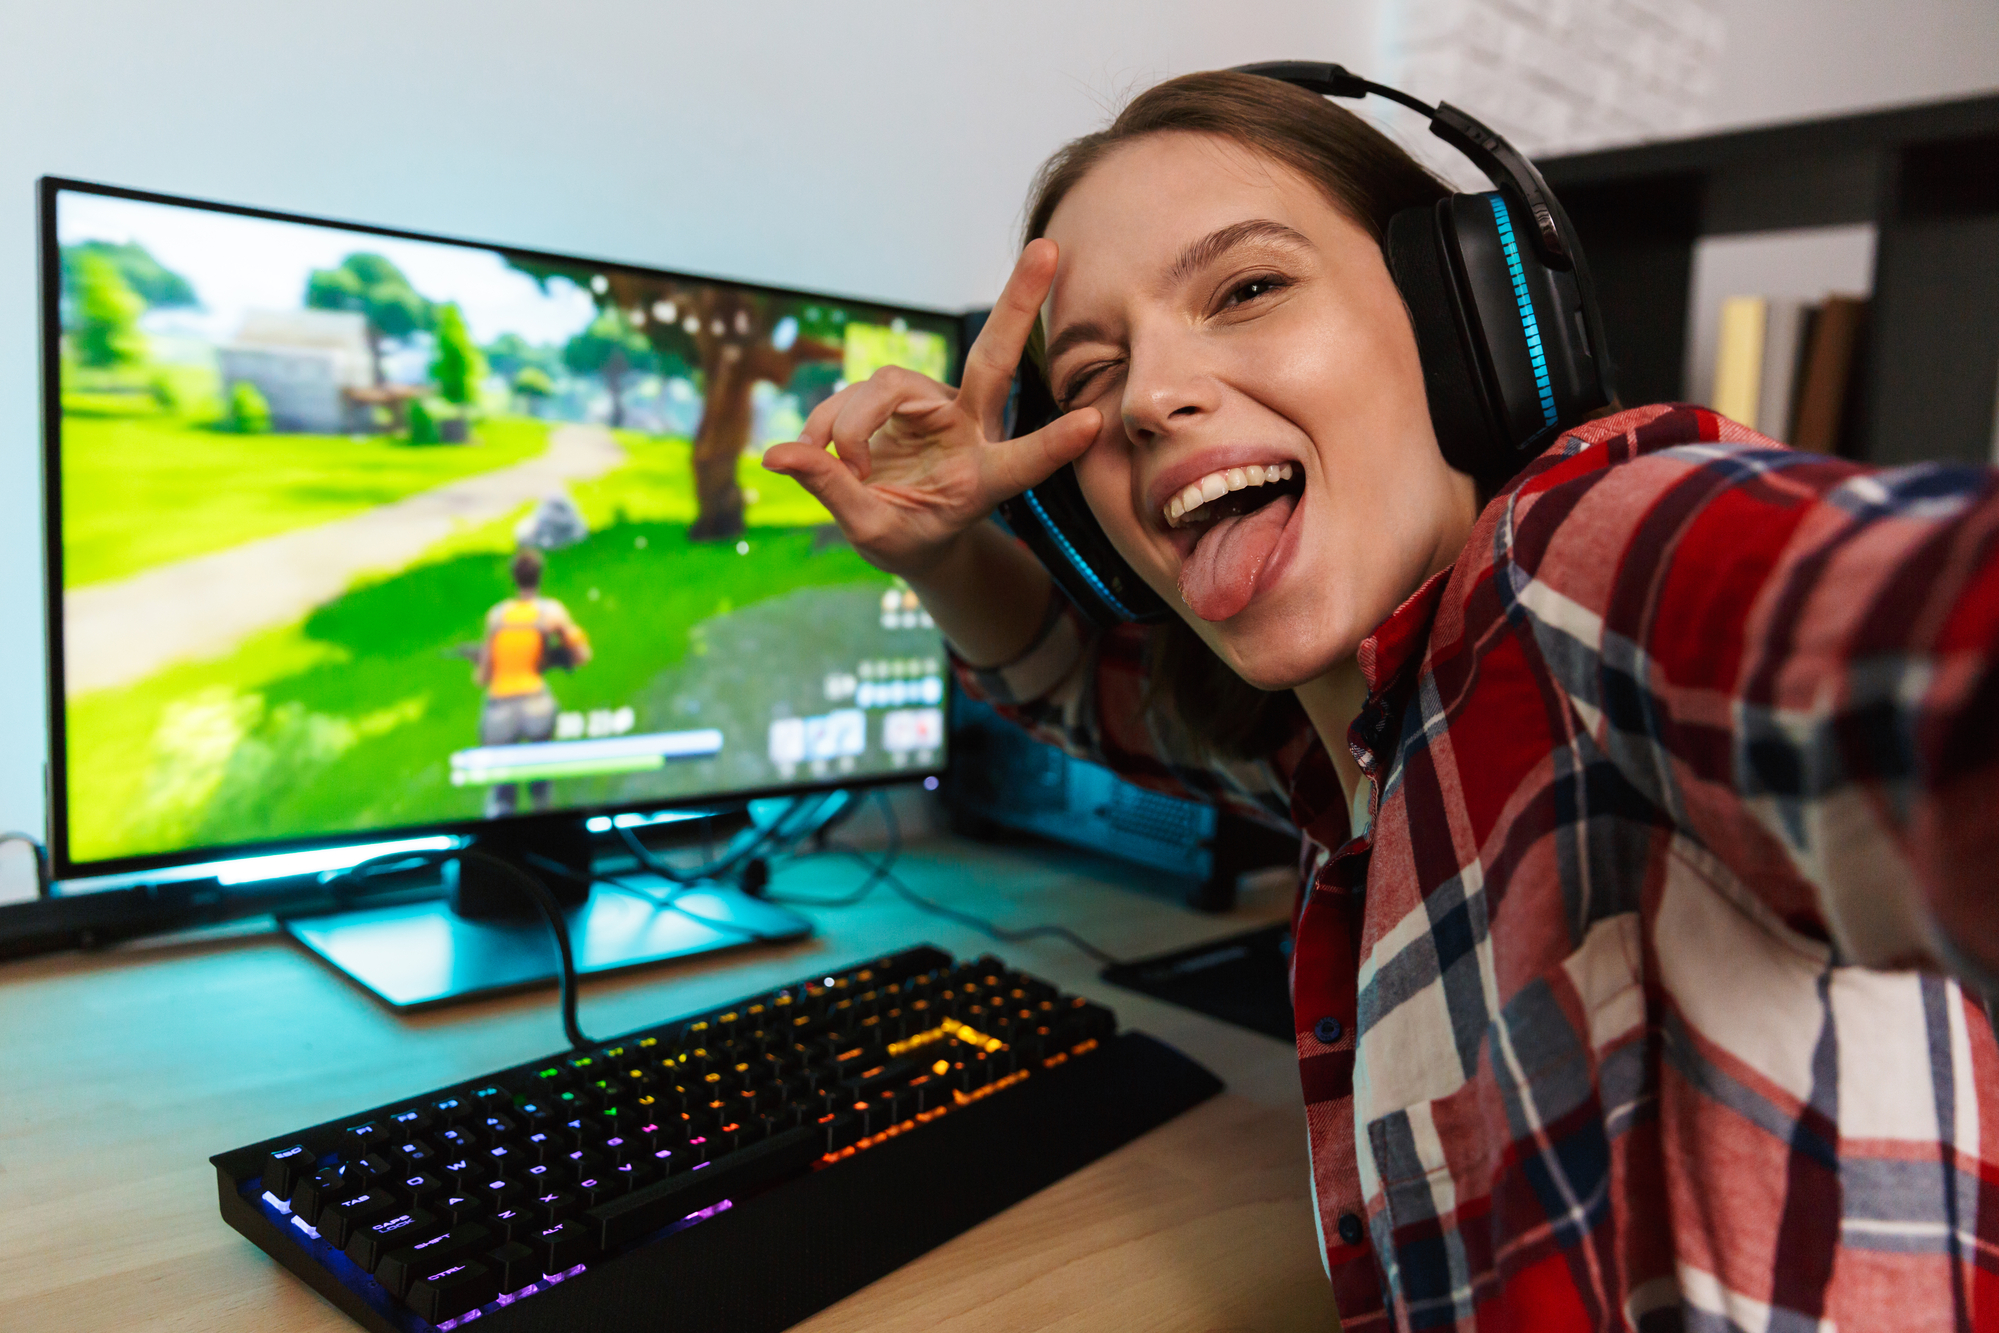 A girl is getting paid to play Fortnite on a computer.